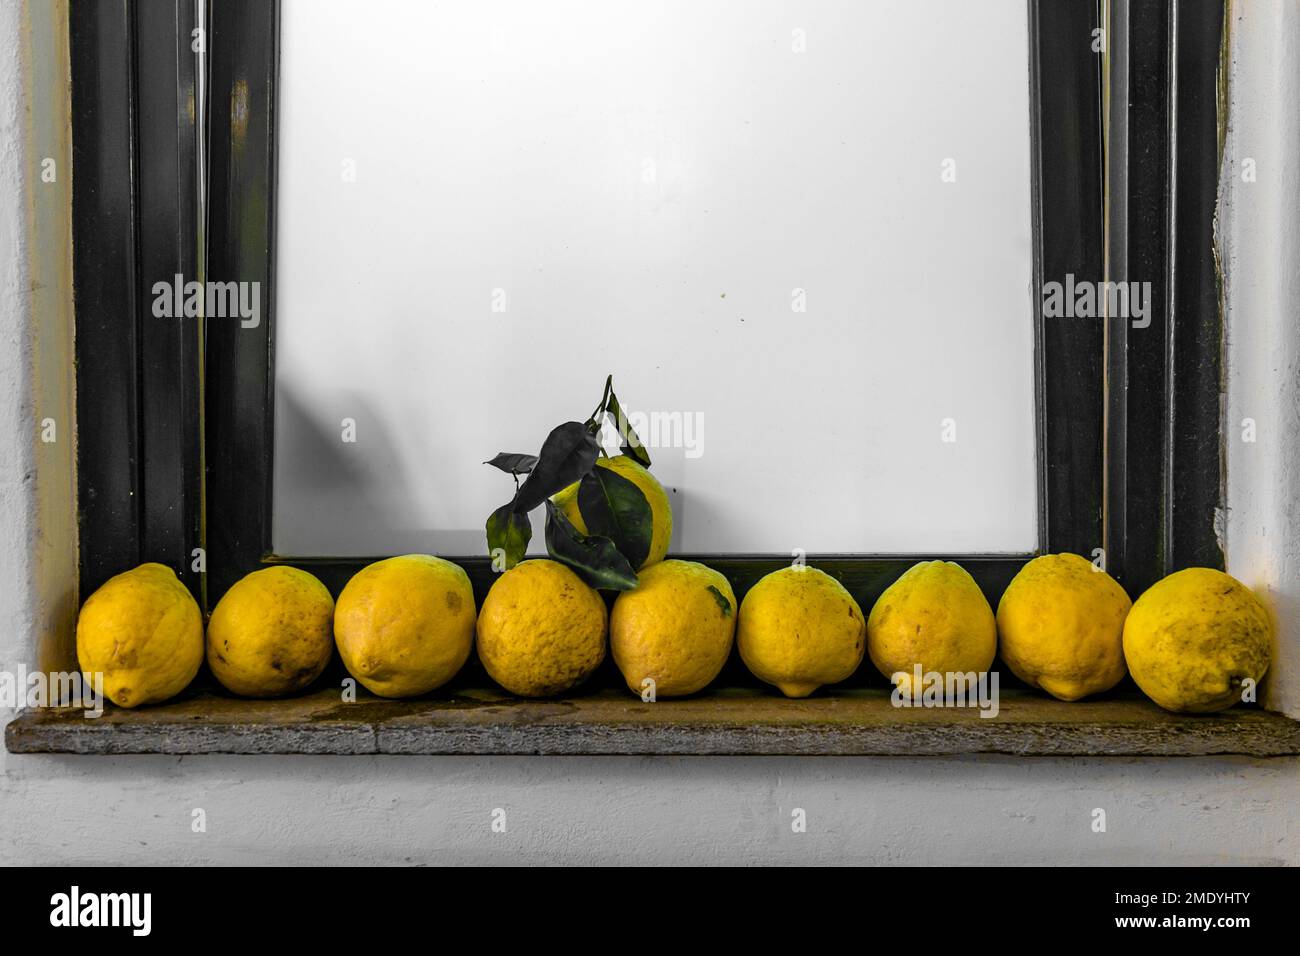 Lemons lined up in a row on a window sill in Capri, Italy. Stock Photo